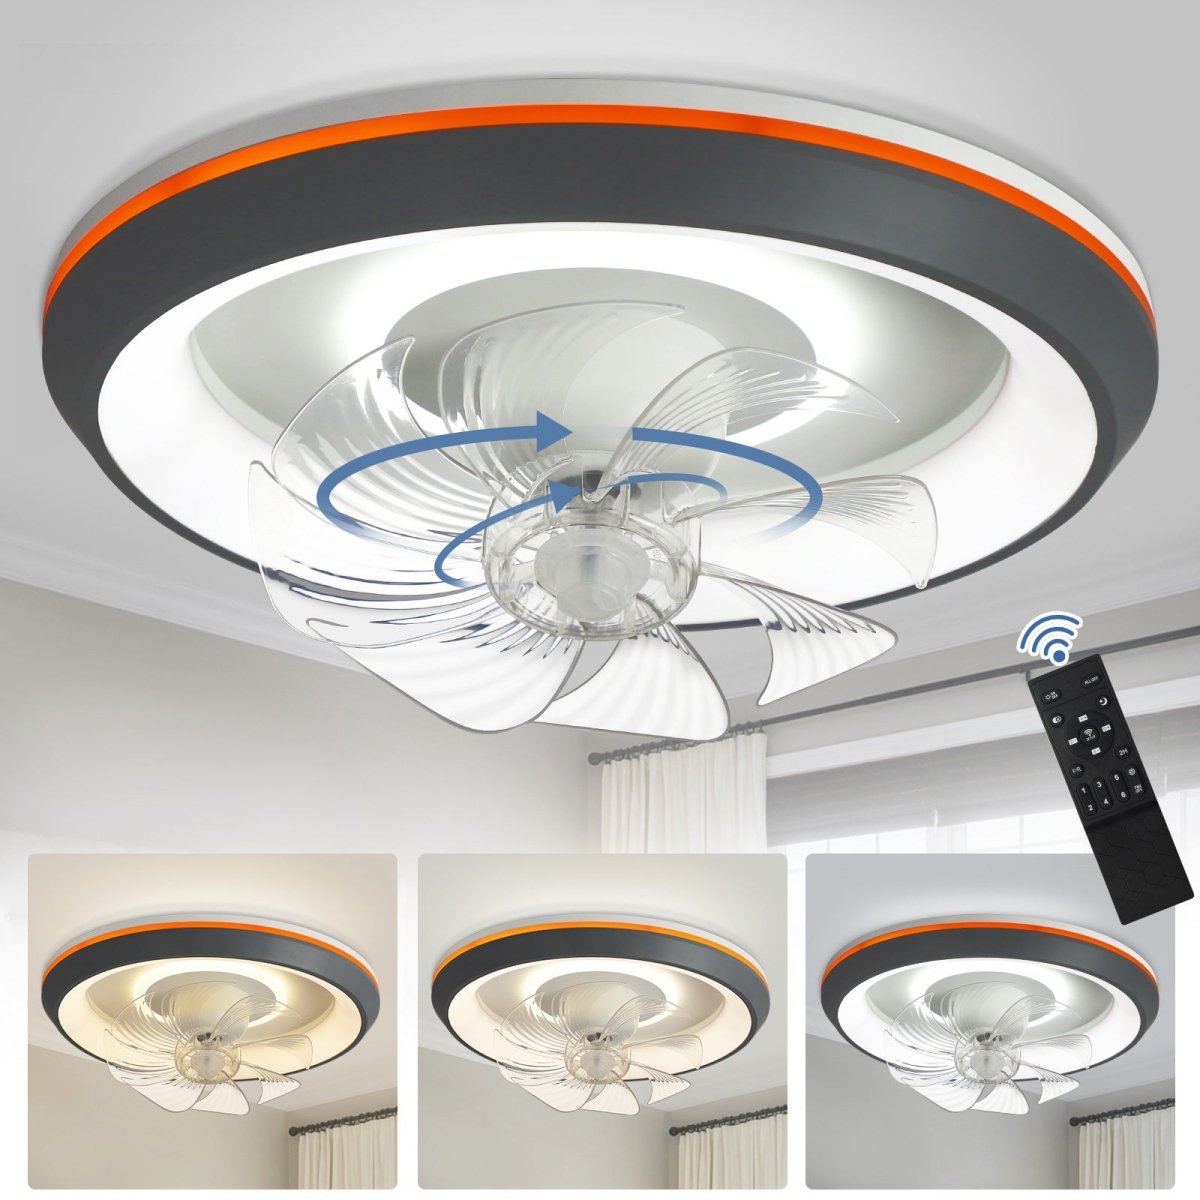 DLLT Modern Ceiling Fans with Lights, 360-Degree Rotation Low Profile Ceiling Fans with Lights and Remote, Dimmable LED Reversible Timing, 3 Colors 6 Speeds Bladeless for Bedroom, Kitchen, 19’’, Grey, UFO - WS-FPZ54-30C-BK 2 | DEPULEY